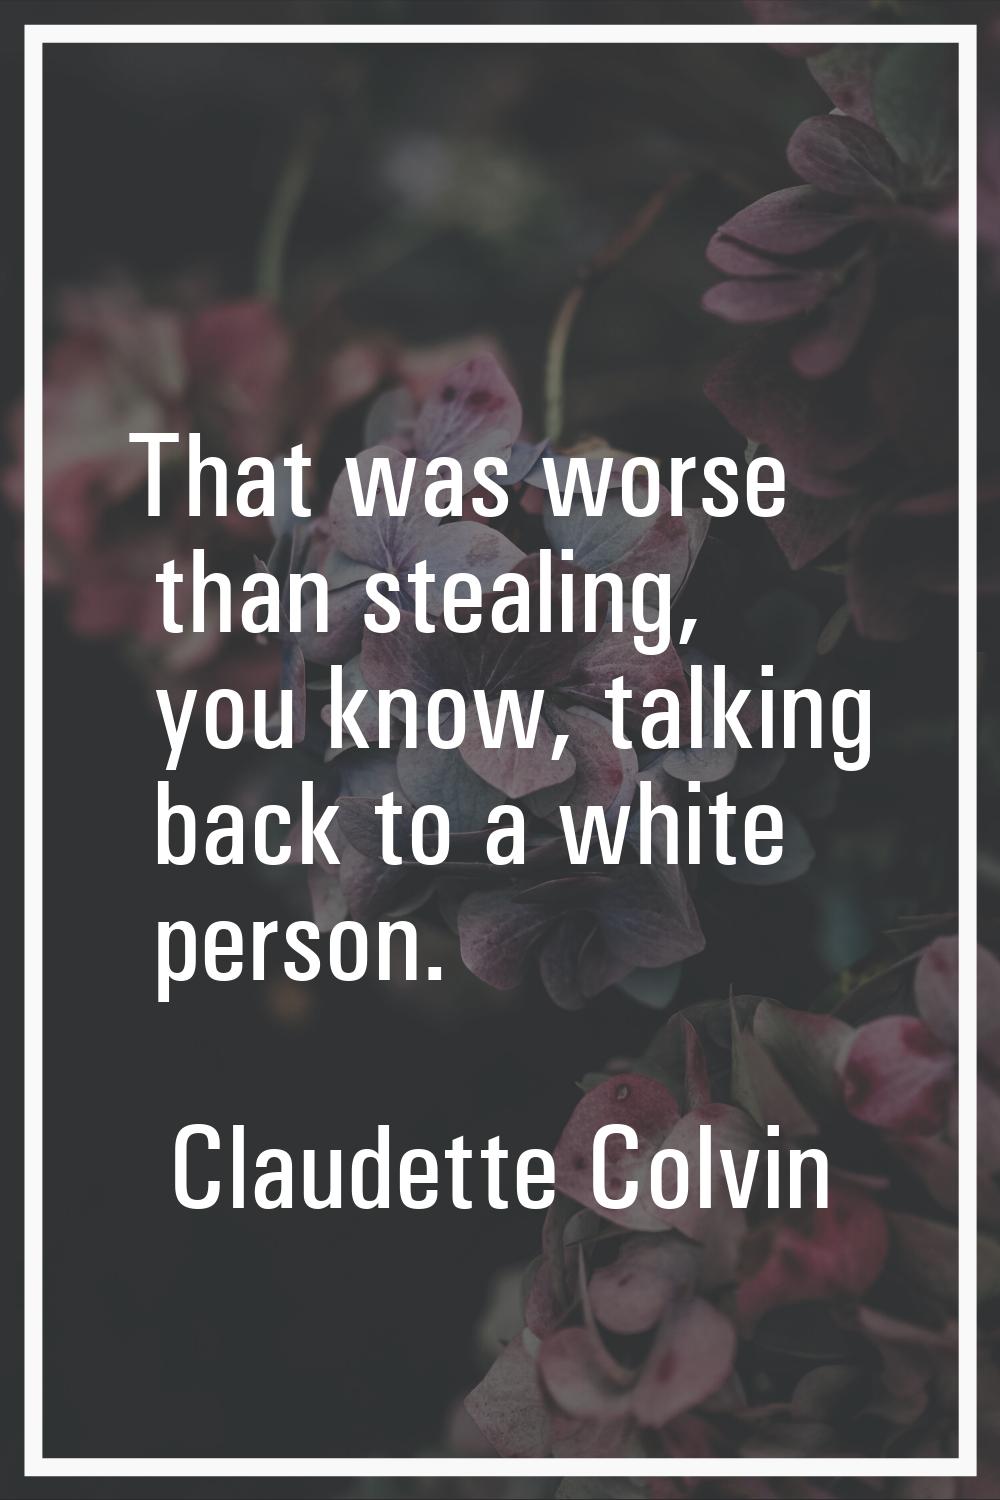 That was worse than stealing, you know, talking back to a white person.